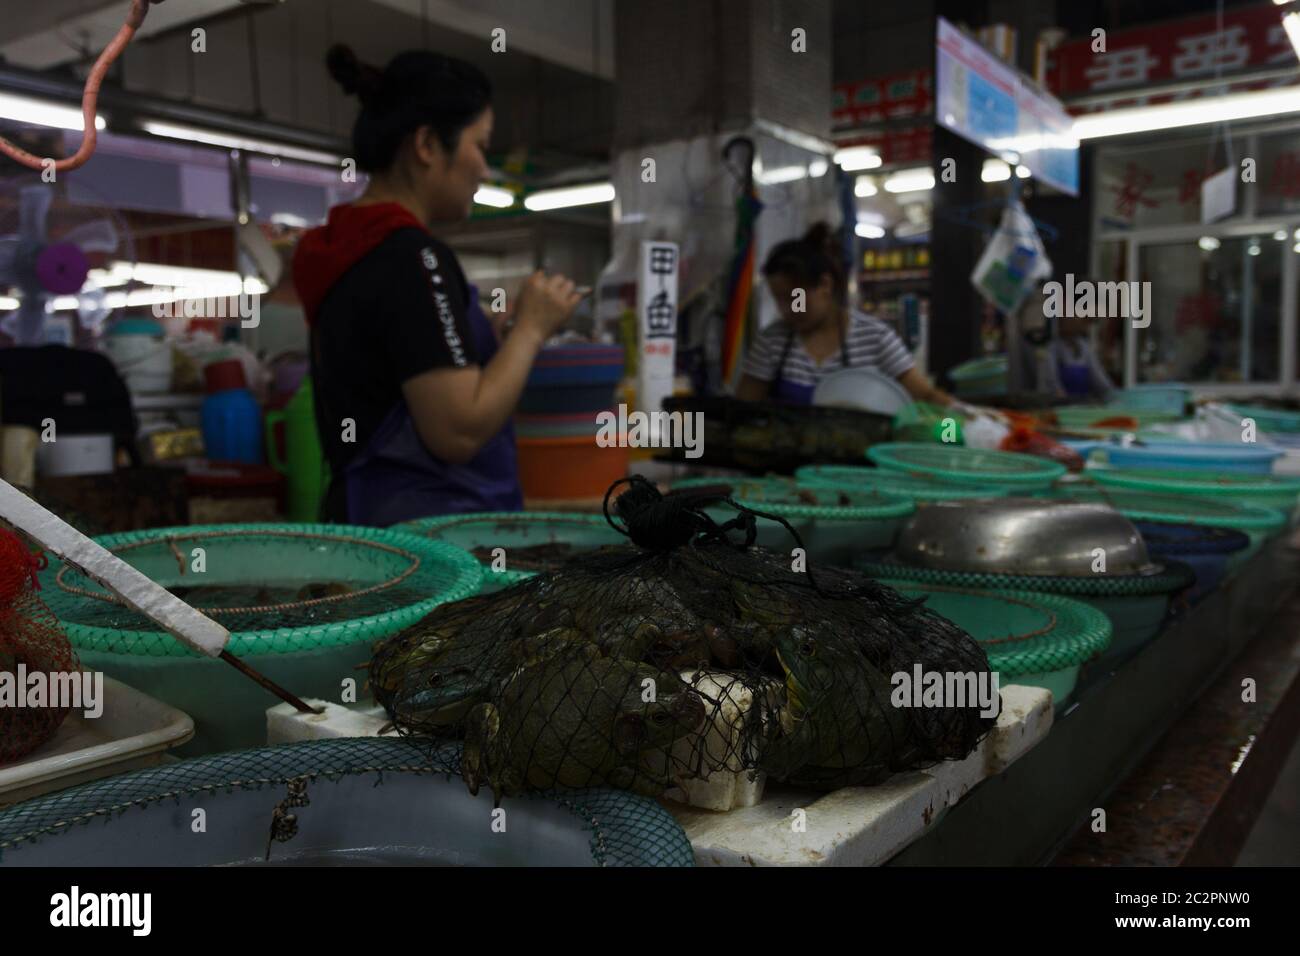 Living animals, fish, frogs sales at local Shanghai market Stock Photo